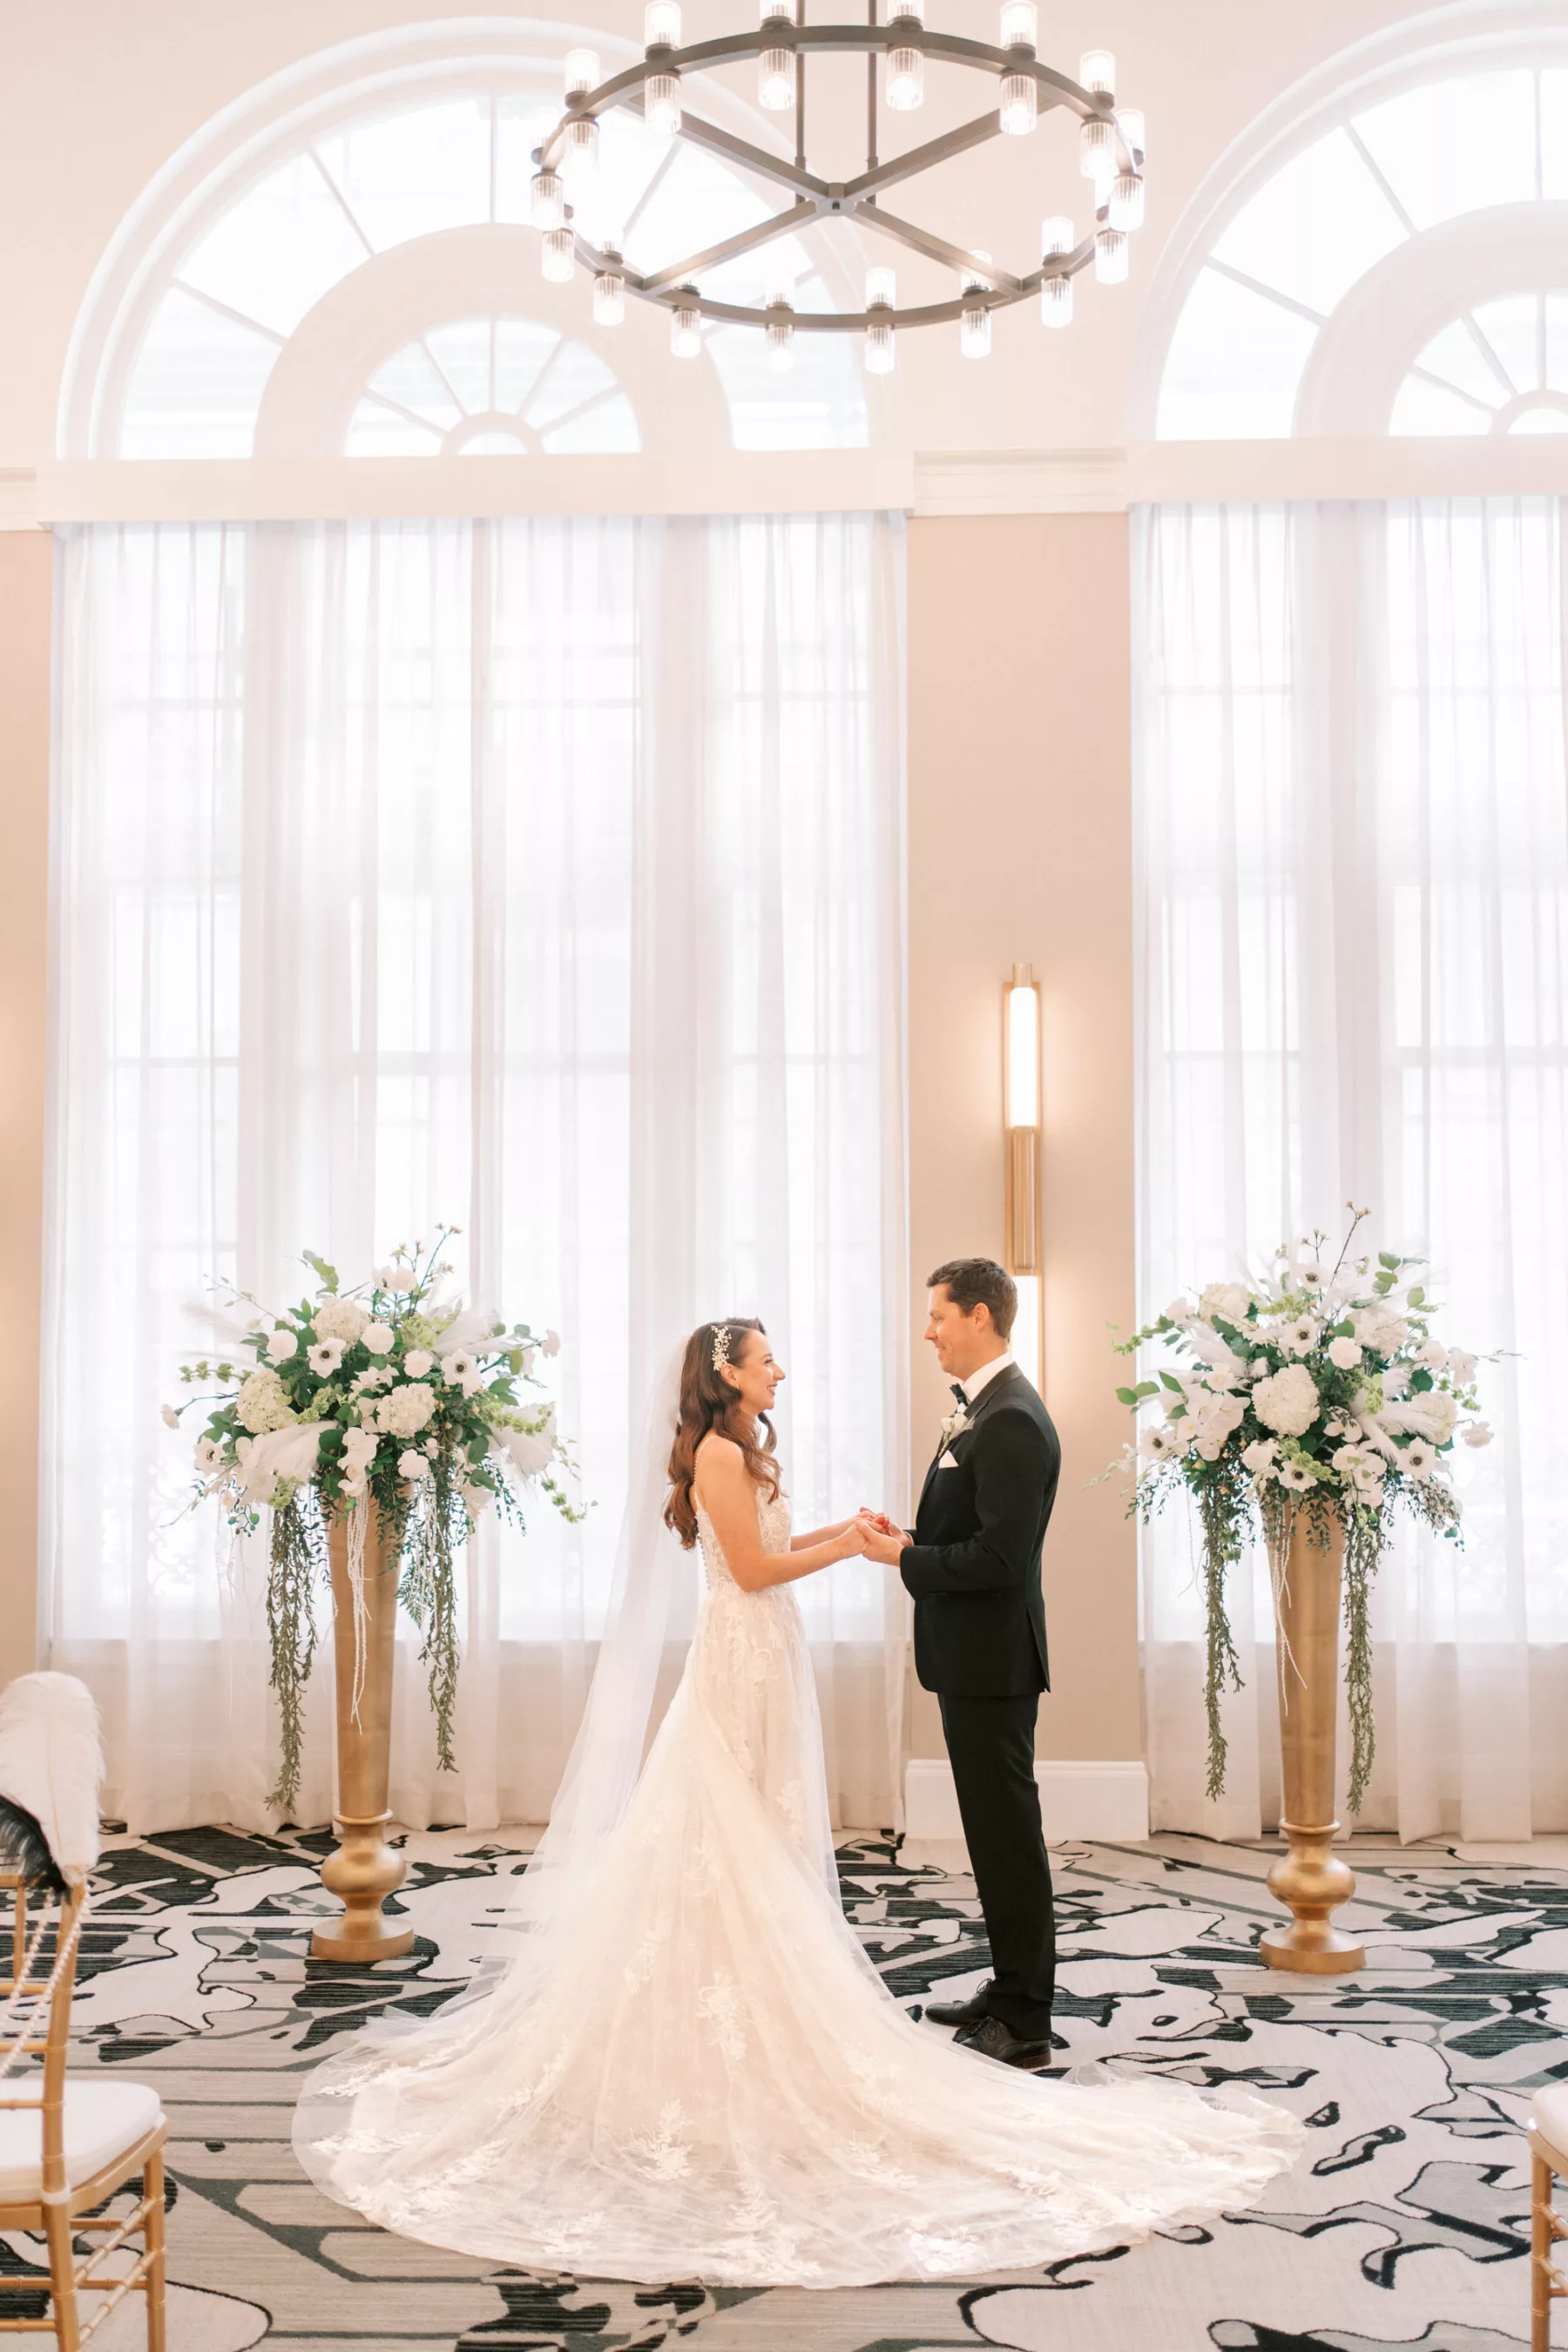 Elegant Great Gatsby Wedding Ceremony Inspiration | Nude and Ivory Beaded Lace A-line Wedding Dress Ideas | Tampa Bay Event Venue Hotel Flor | Boutique Truly Forever Bridal Tampa | Photographer Eddy Almaguer Photography | Videographer Priceless Studio Design